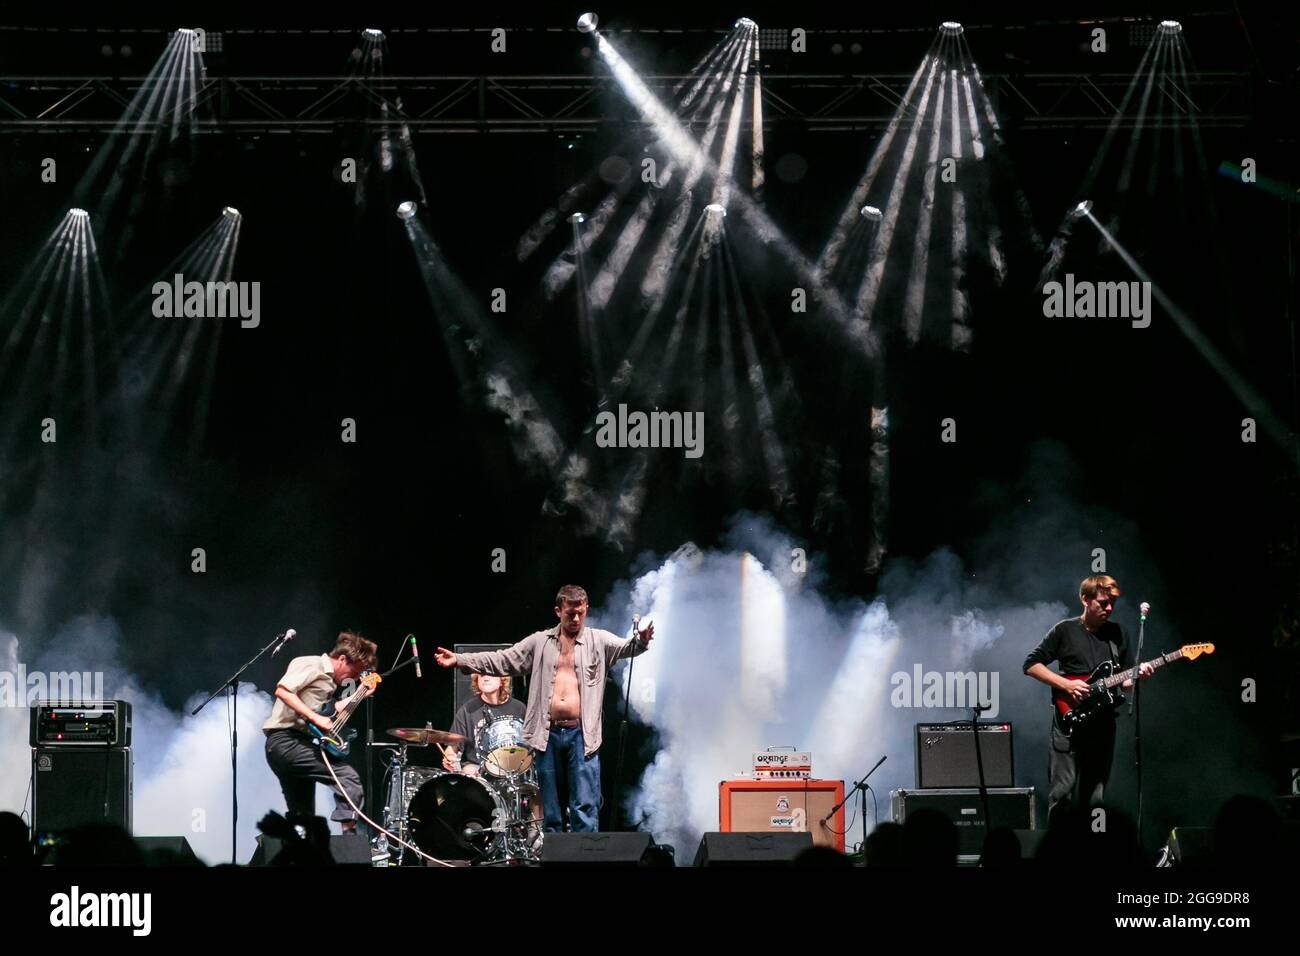 English punk band shame, perfrom live during the Todays festival in Turin, Italy Stock Photo